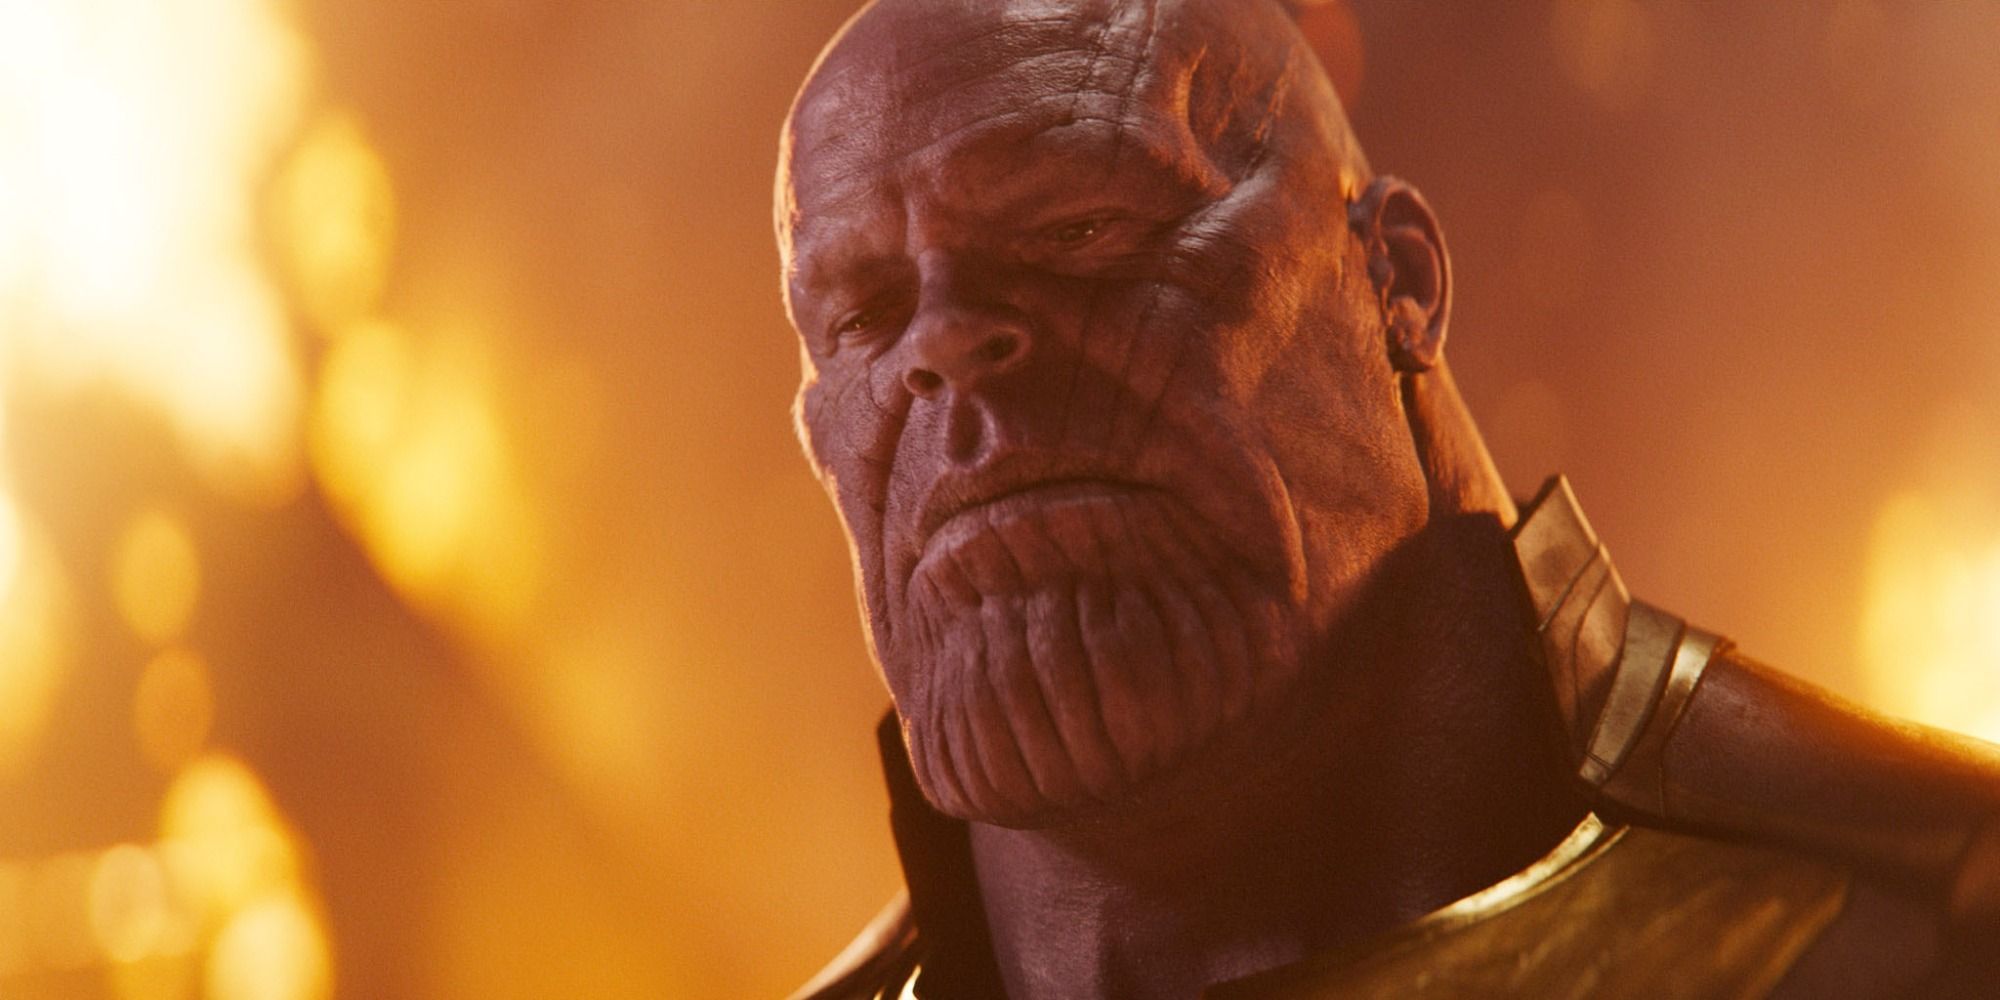 The Mad Titan Thanos close-up with a calm expression and fiery background